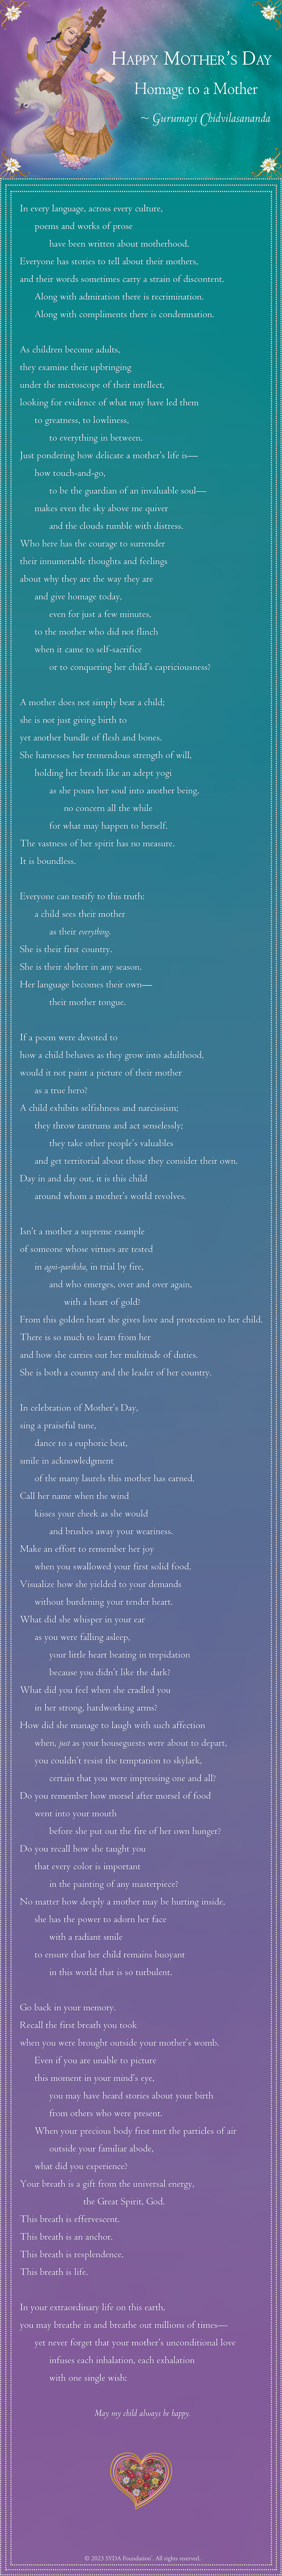 Poem by Gurumayi - Homage to a Mother